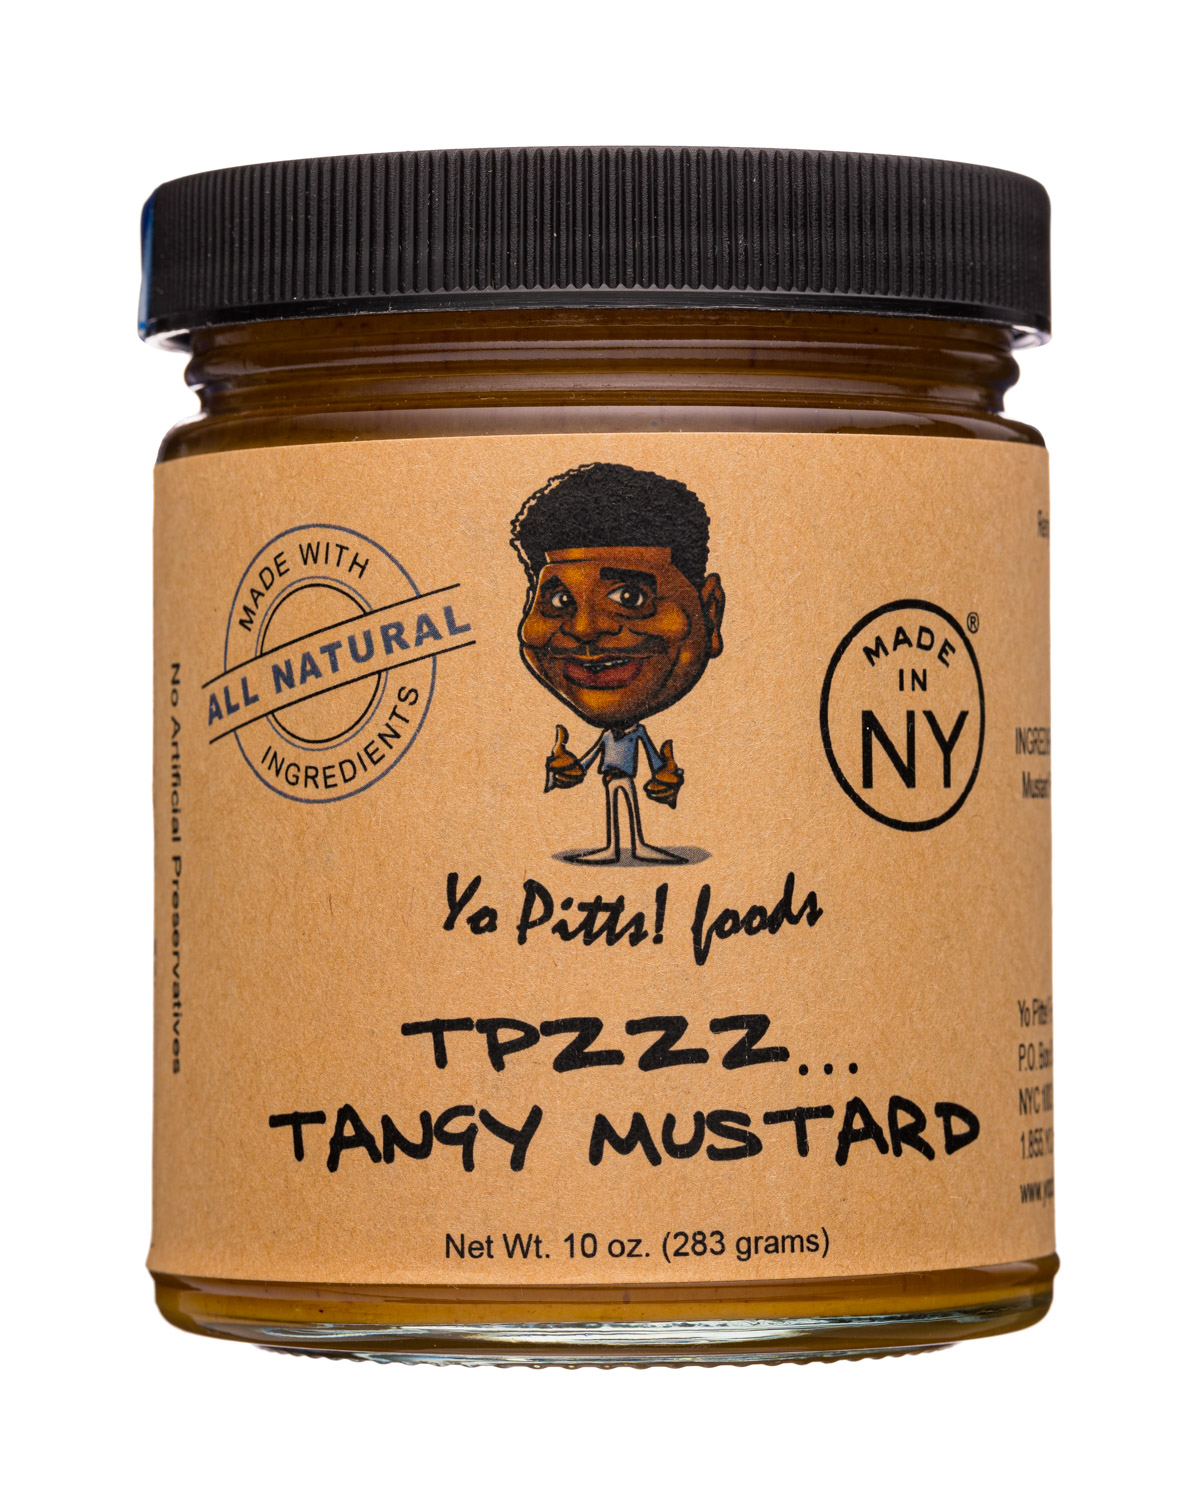 TPzzz Tangy Mustard